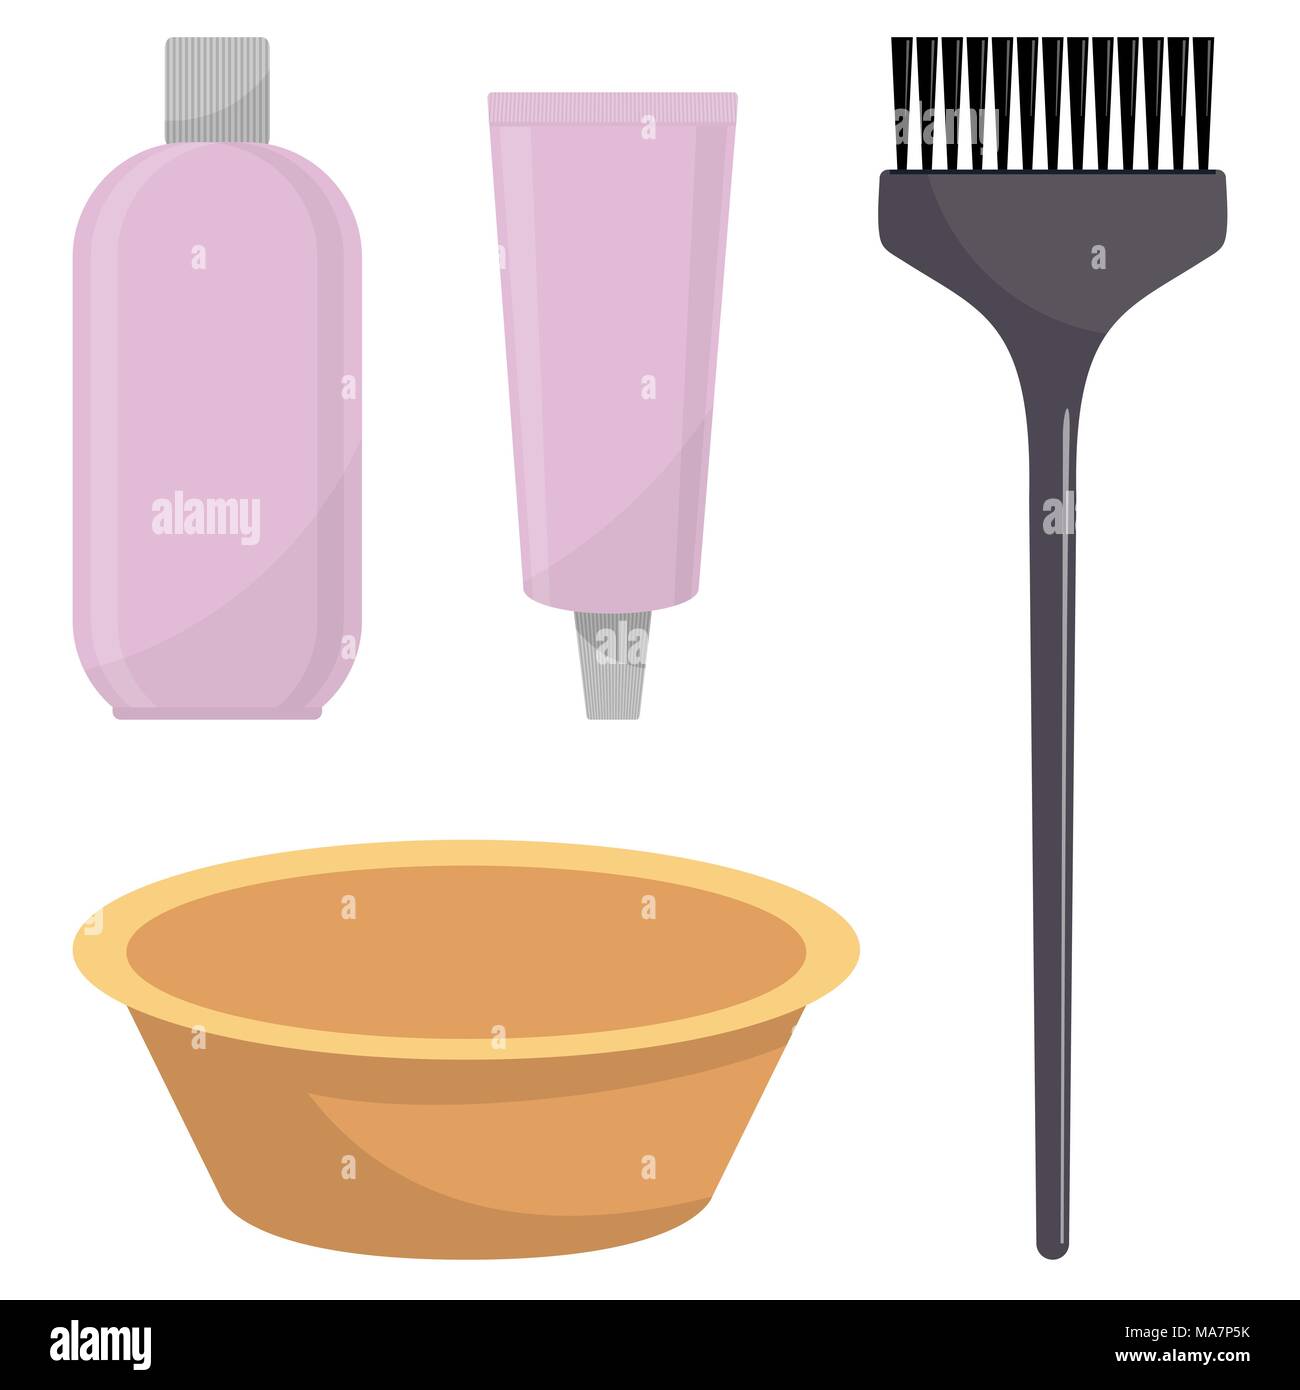 Hair dye, oxidizer, hair dye brush and mixing bowl. Hair coloring set, vector illustration, isolated on white Stock Vector